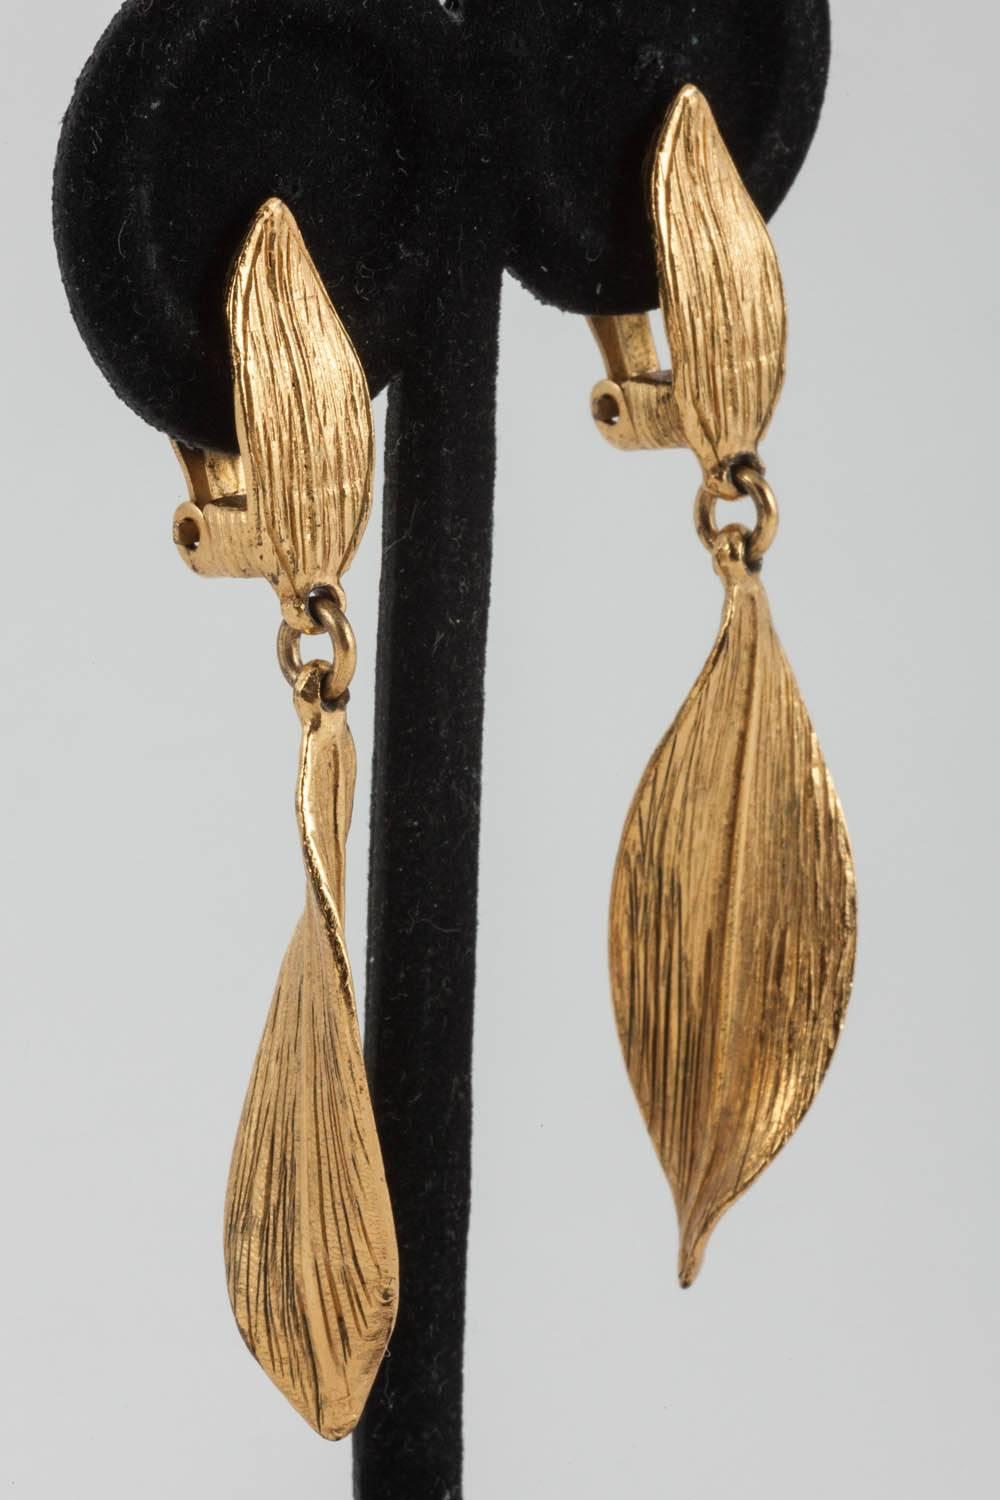 Elegant twisted leaf earrings of lovely quality gilt metal by Christian Dior Boutique.  These clip on earrings are comfortable to wear and move gently when worn. 
Christian Dior was born into a wealthy family in 1905, being raised in the Normandy